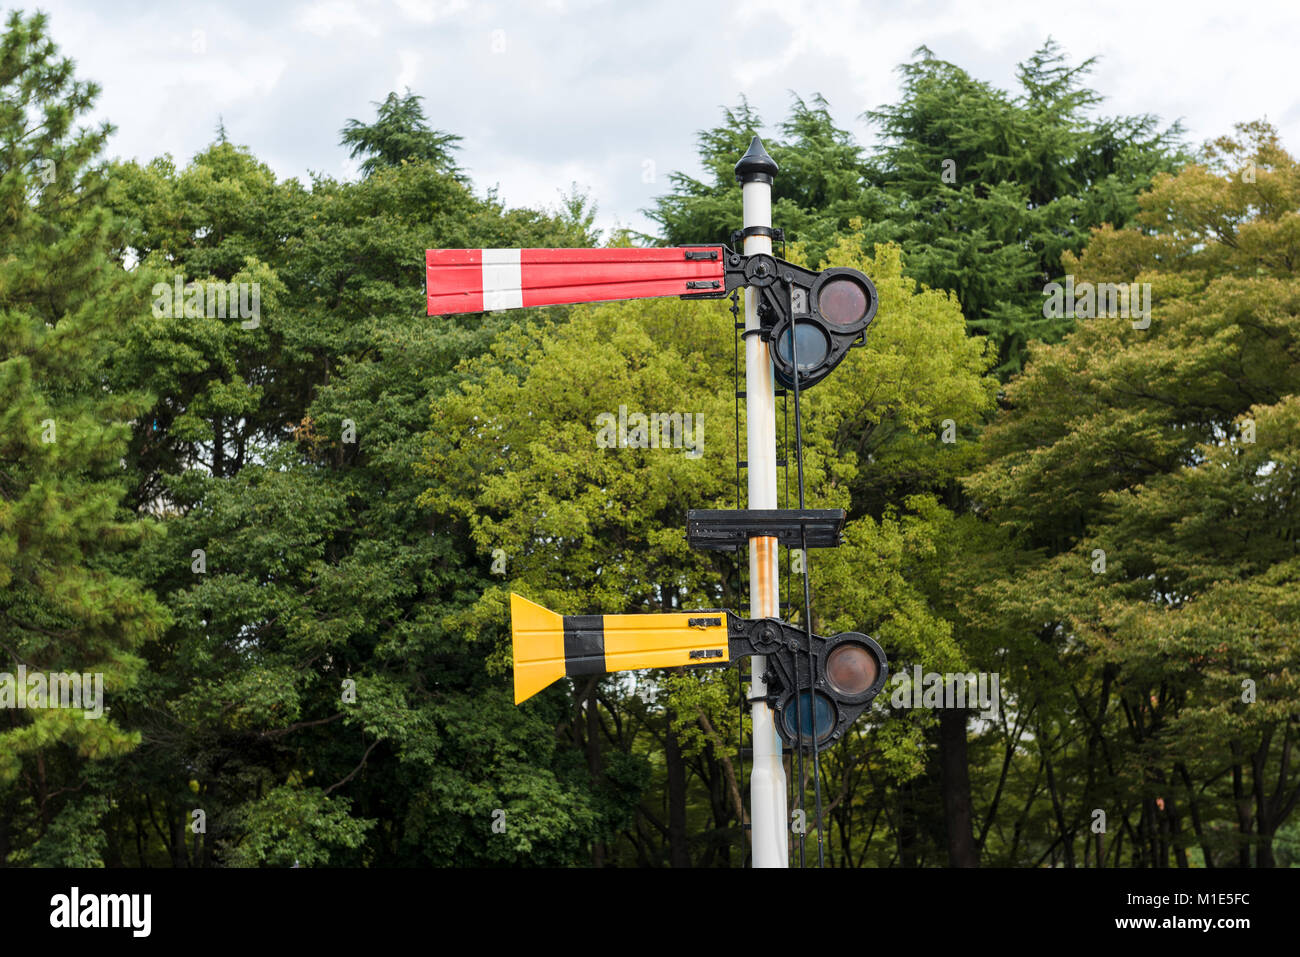 British Railway Semaphore Signalling post (in Japan). Red sign signals for train to 'stop'. Yellow signal is a 'distant' signal Stock Photo